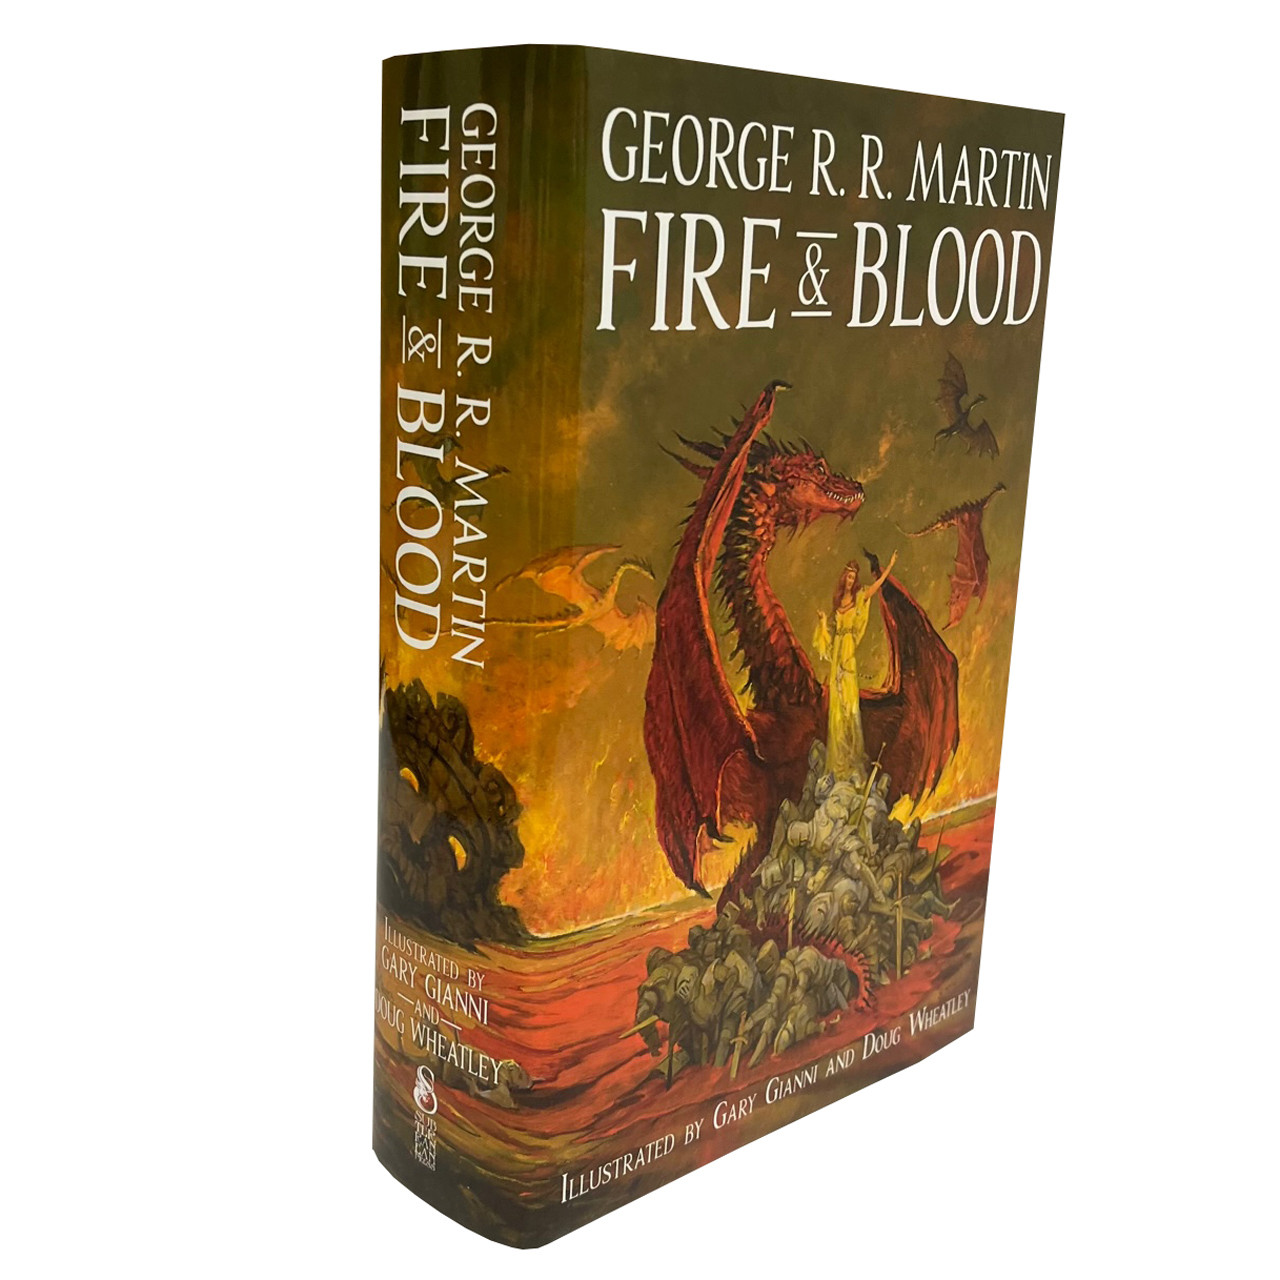 George R.R. Martin "A Knight Of Seven Kingdoms", "Fire & Blood", "Rogues", "The Book Of Swords", "The Book Of Magic" Signed Limited Edition Partial Matching Set [Very Fine]